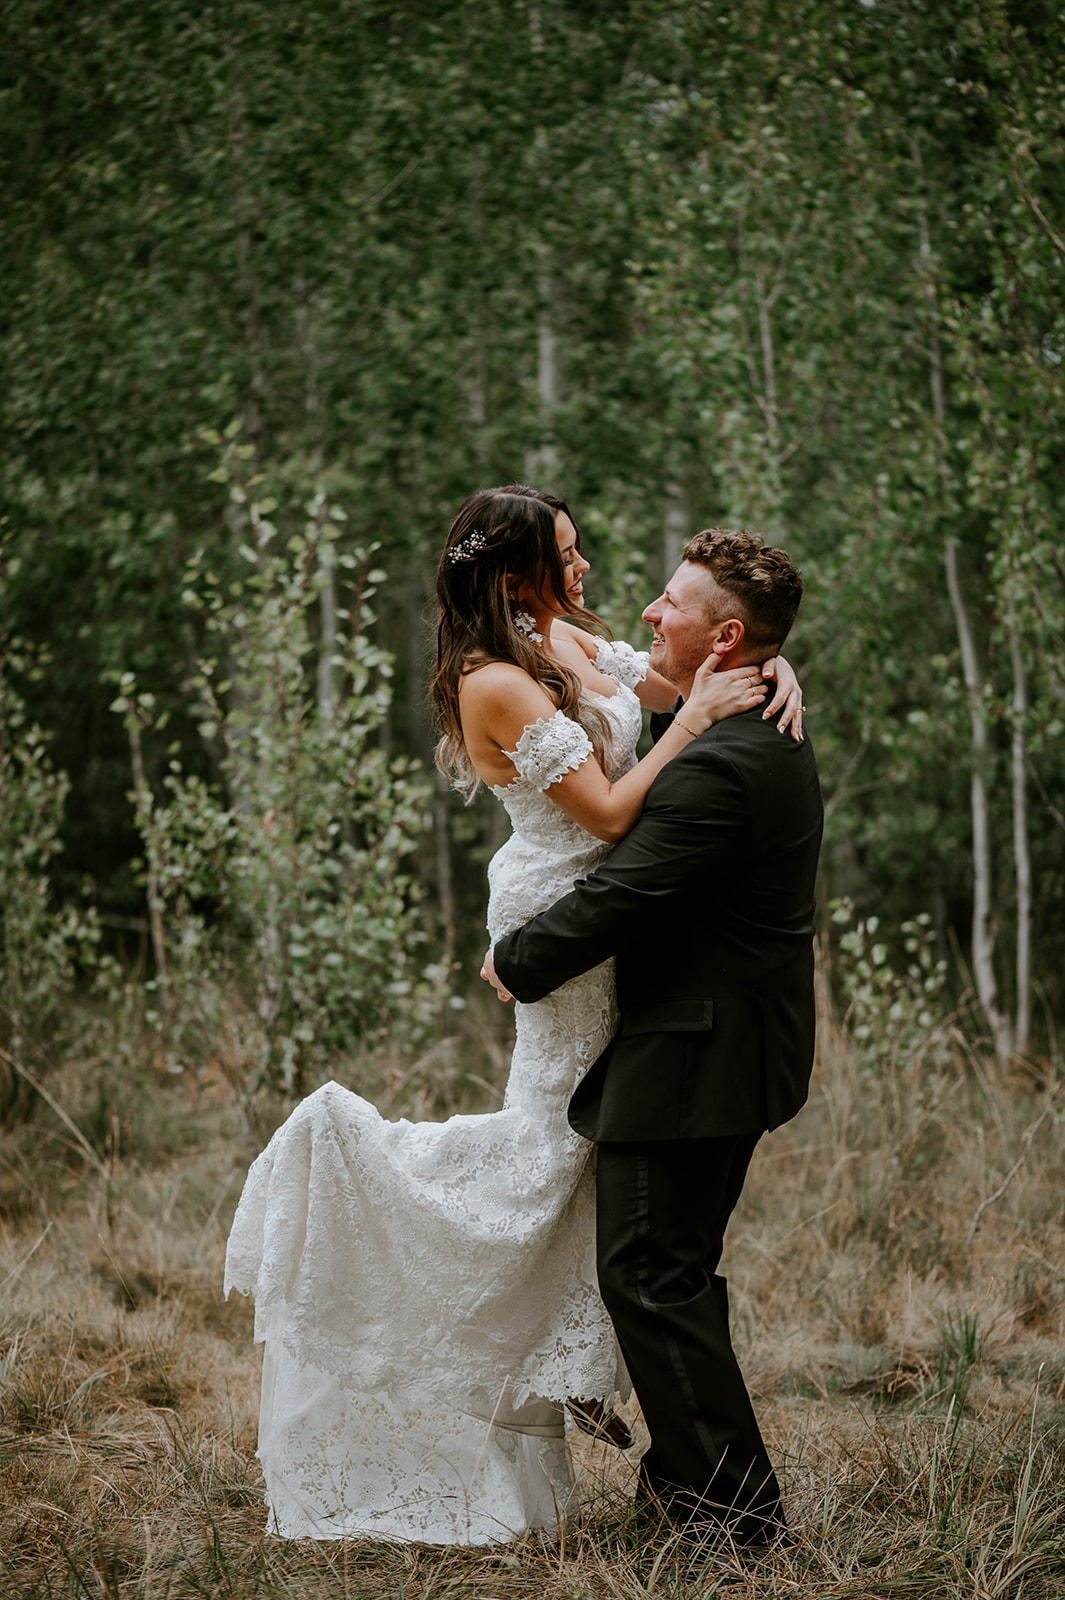 Groom picks bride up and spins her around in the aspen groves at shevlin park